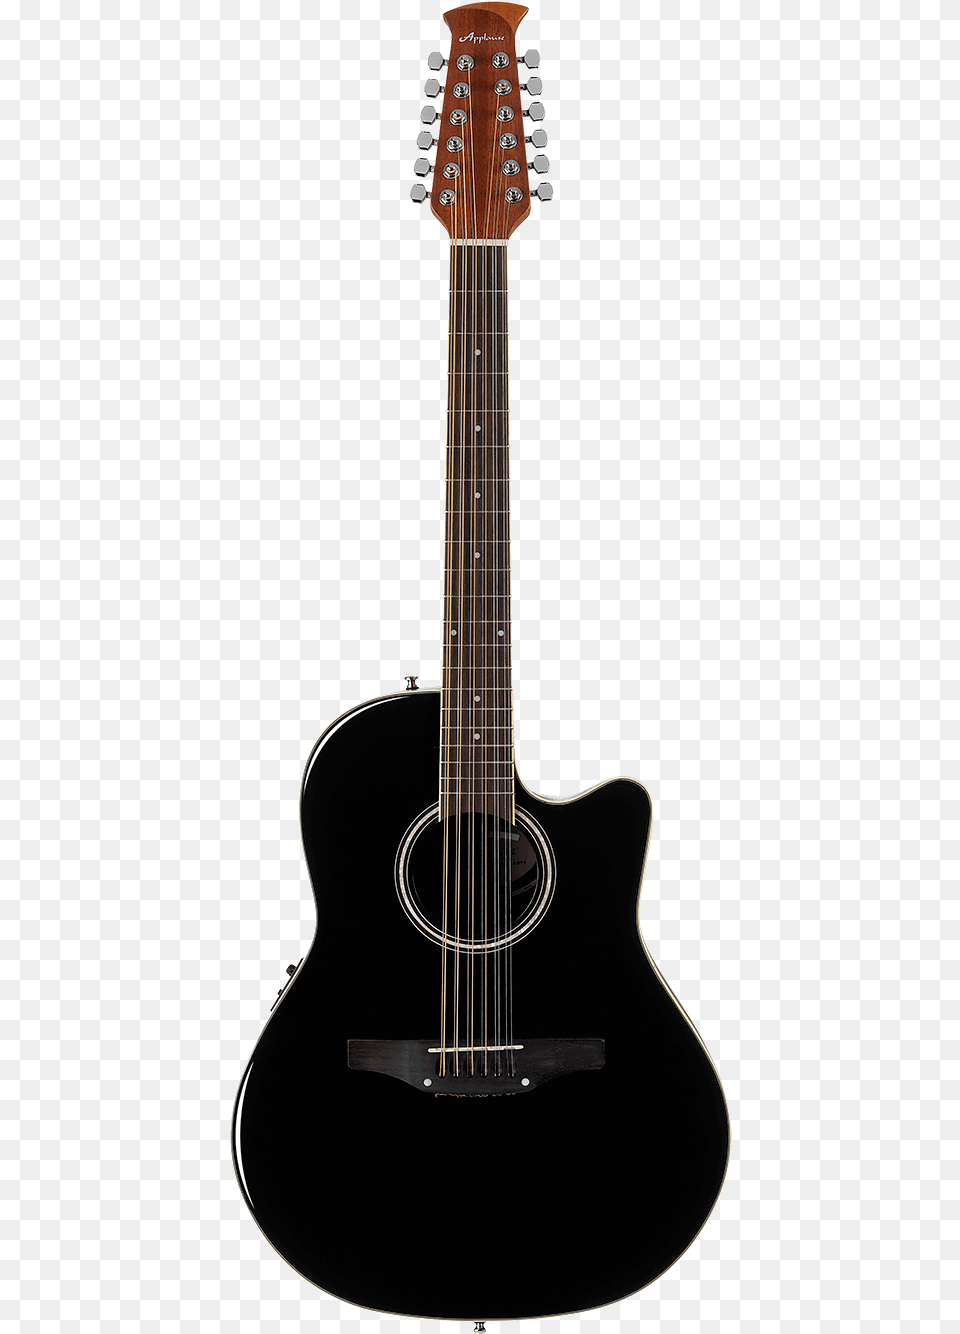 Applause Specialty 12 String Ovation Cs24 5 Celebrity Standard, Guitar, Musical Instrument, Bass Guitar Png Image